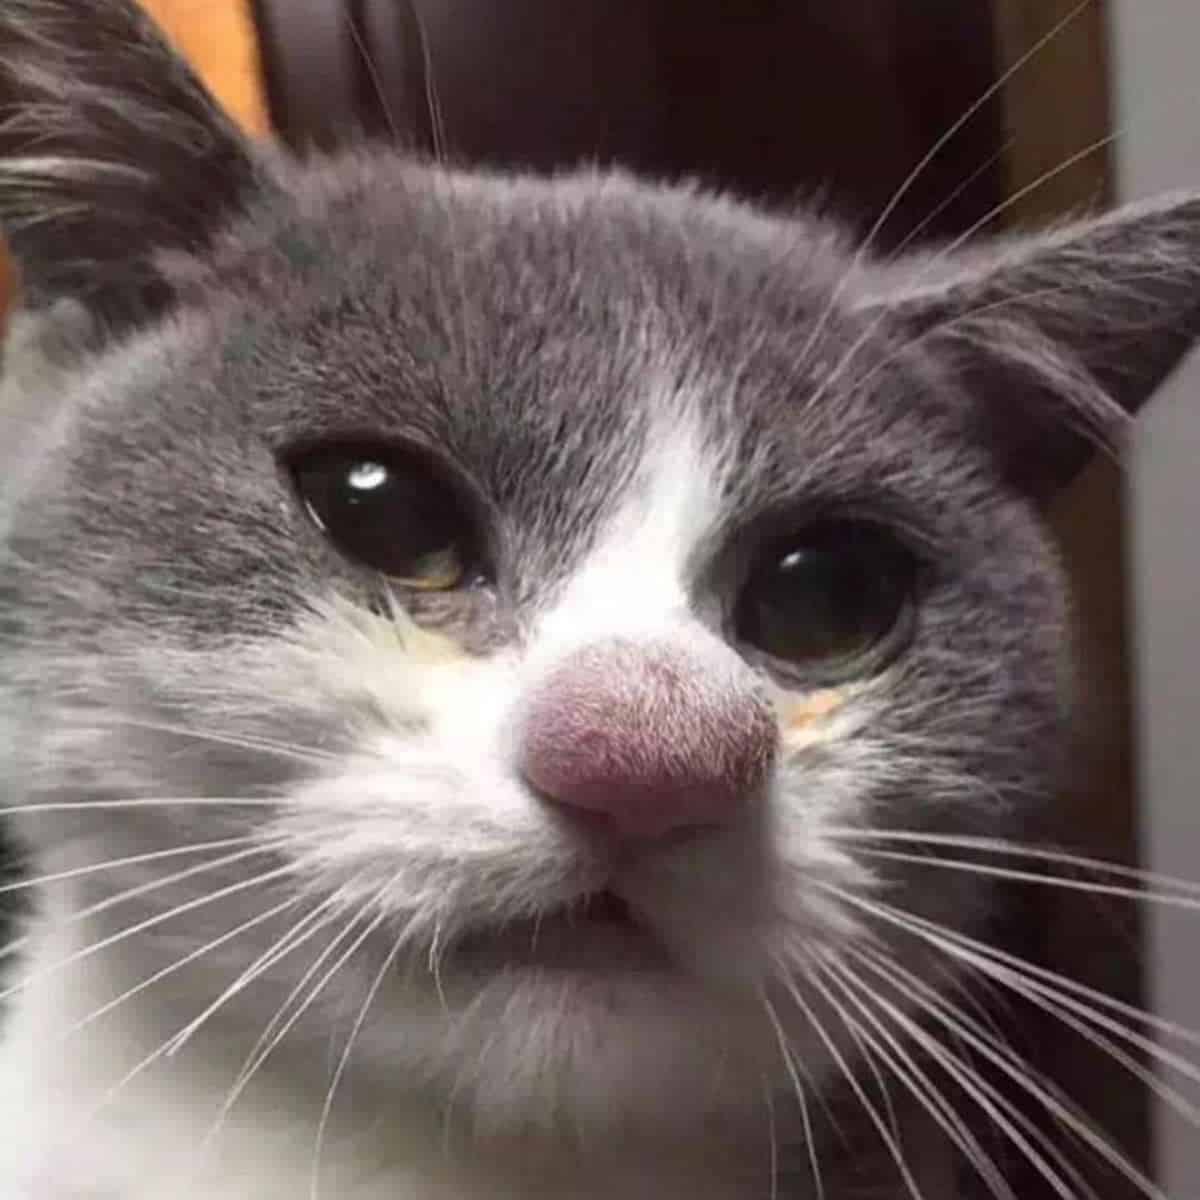 close-up photo of a cat with swollen nose